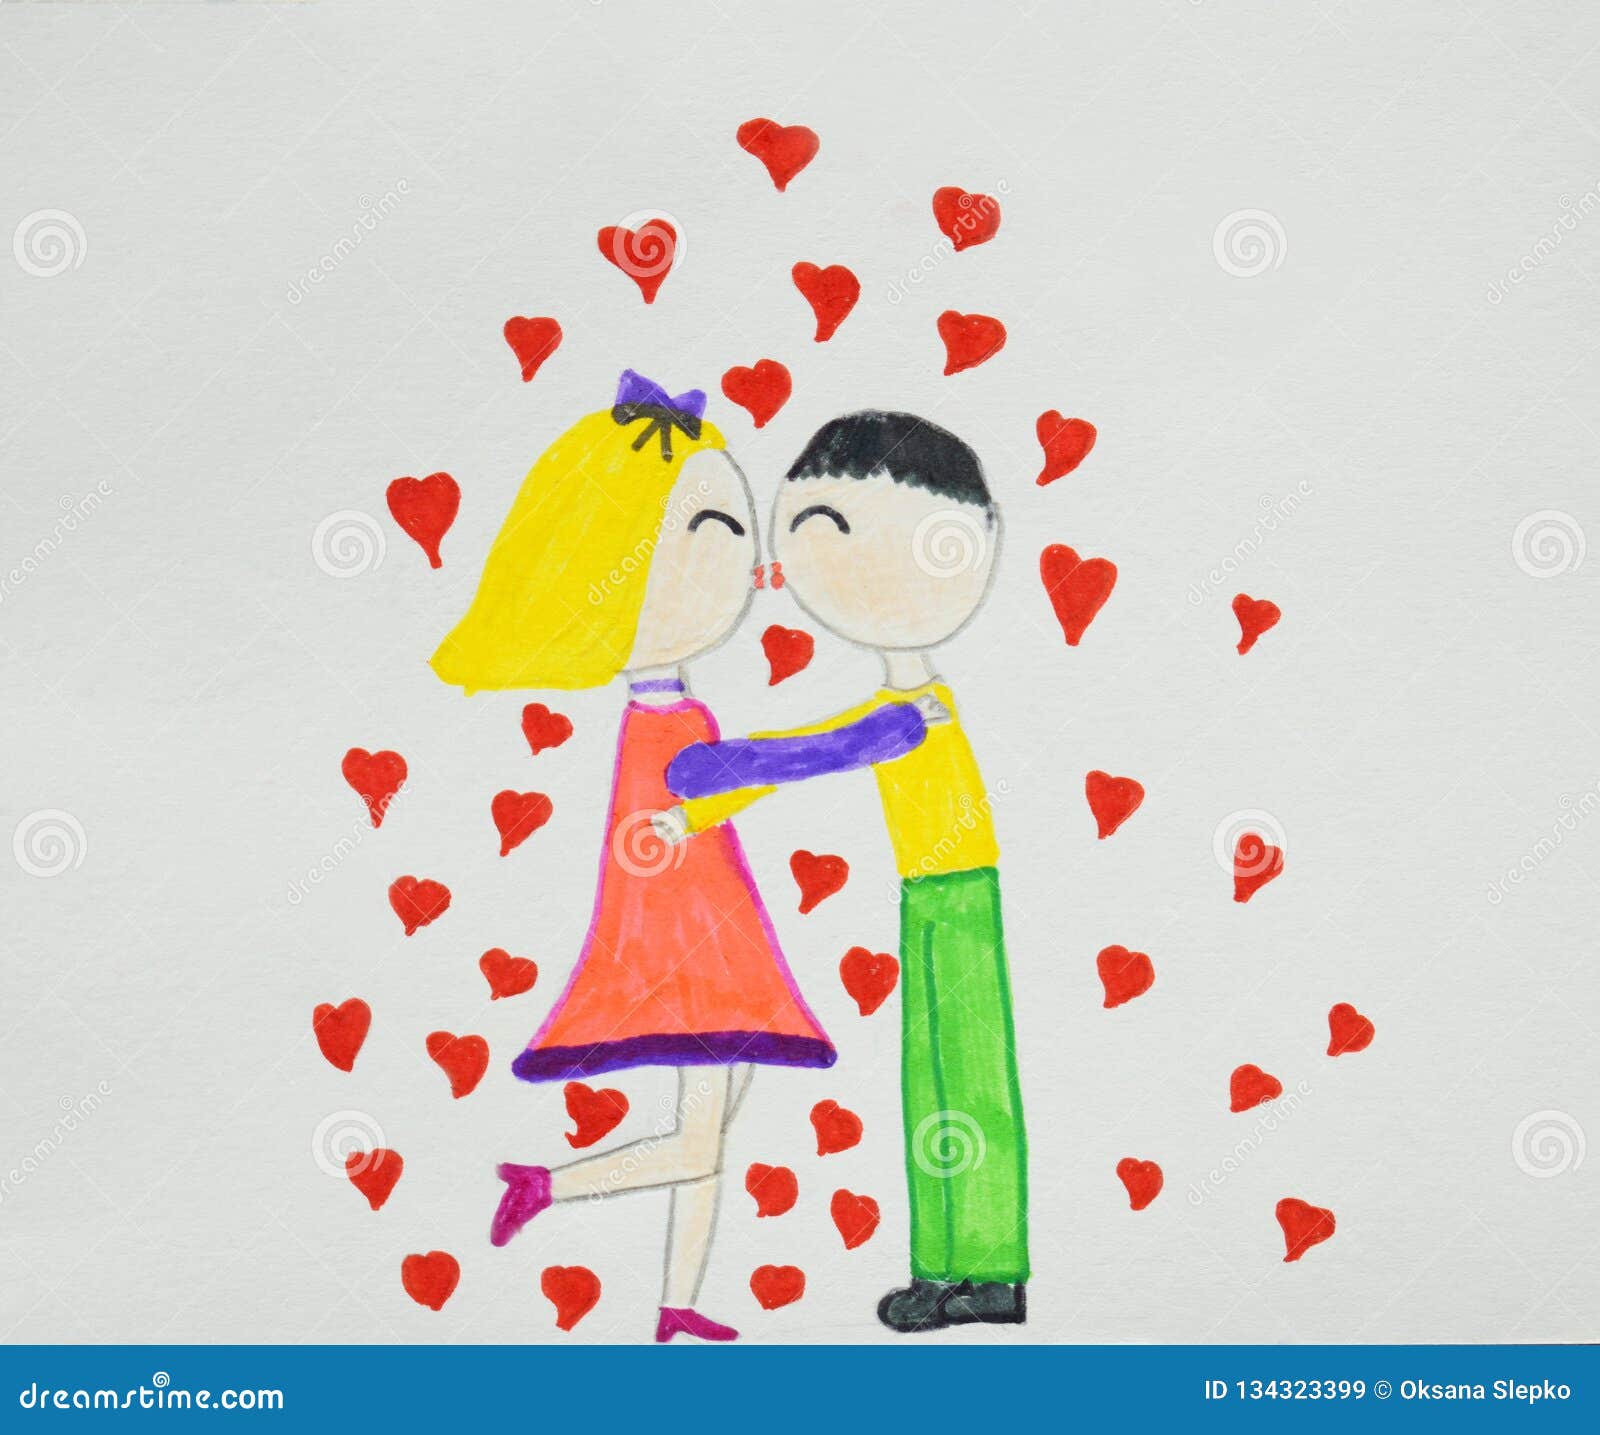 Romantic Couples Boy And Girl In Love Hugging Cuddling And Kissing Children S Drawing Hand Drawn Stock Image Image Of Holding Romance